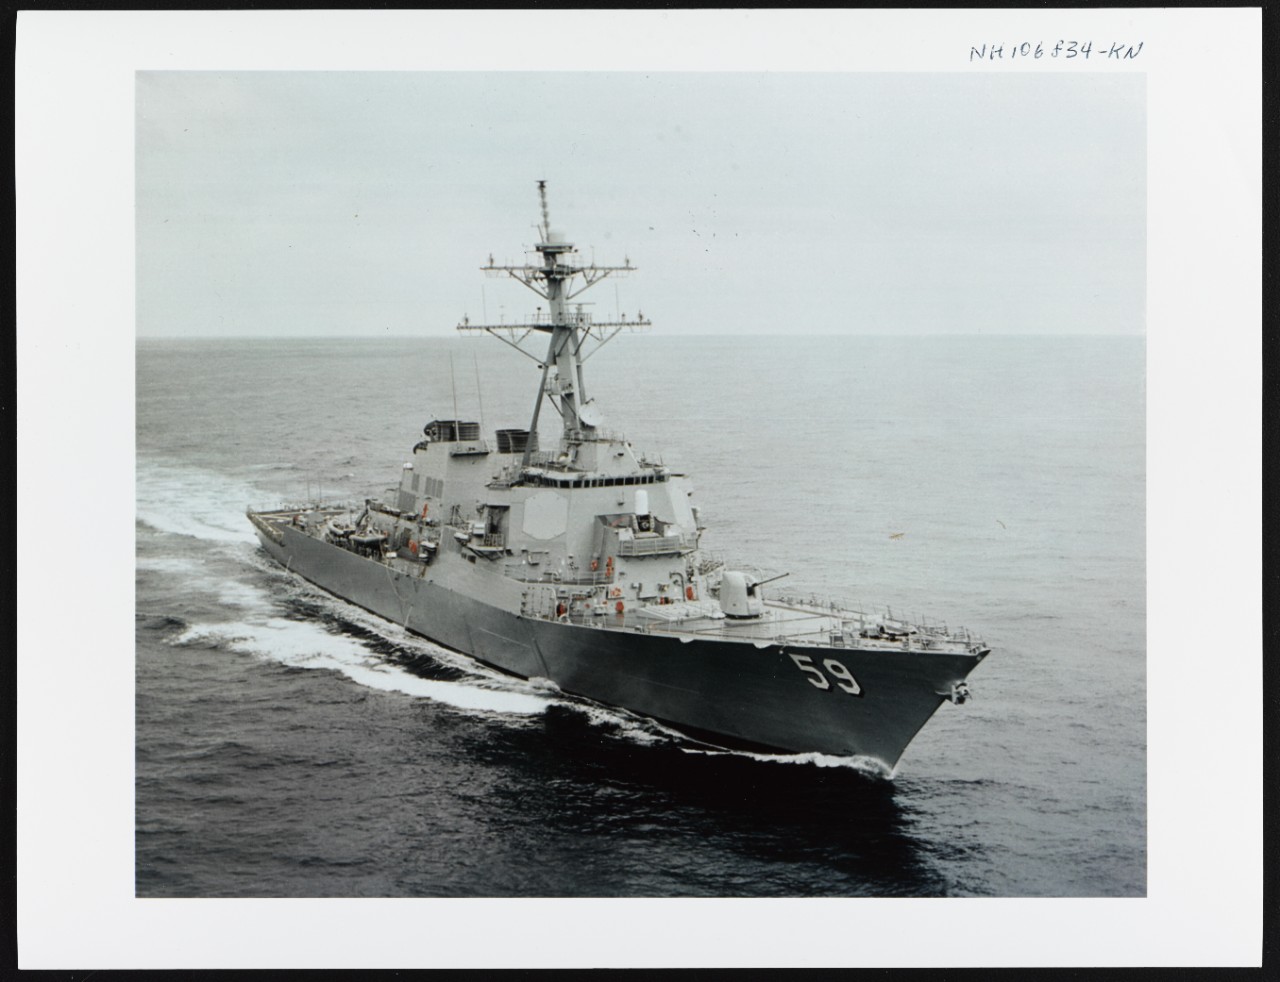 Photo # NH 106834-KN USS Russell